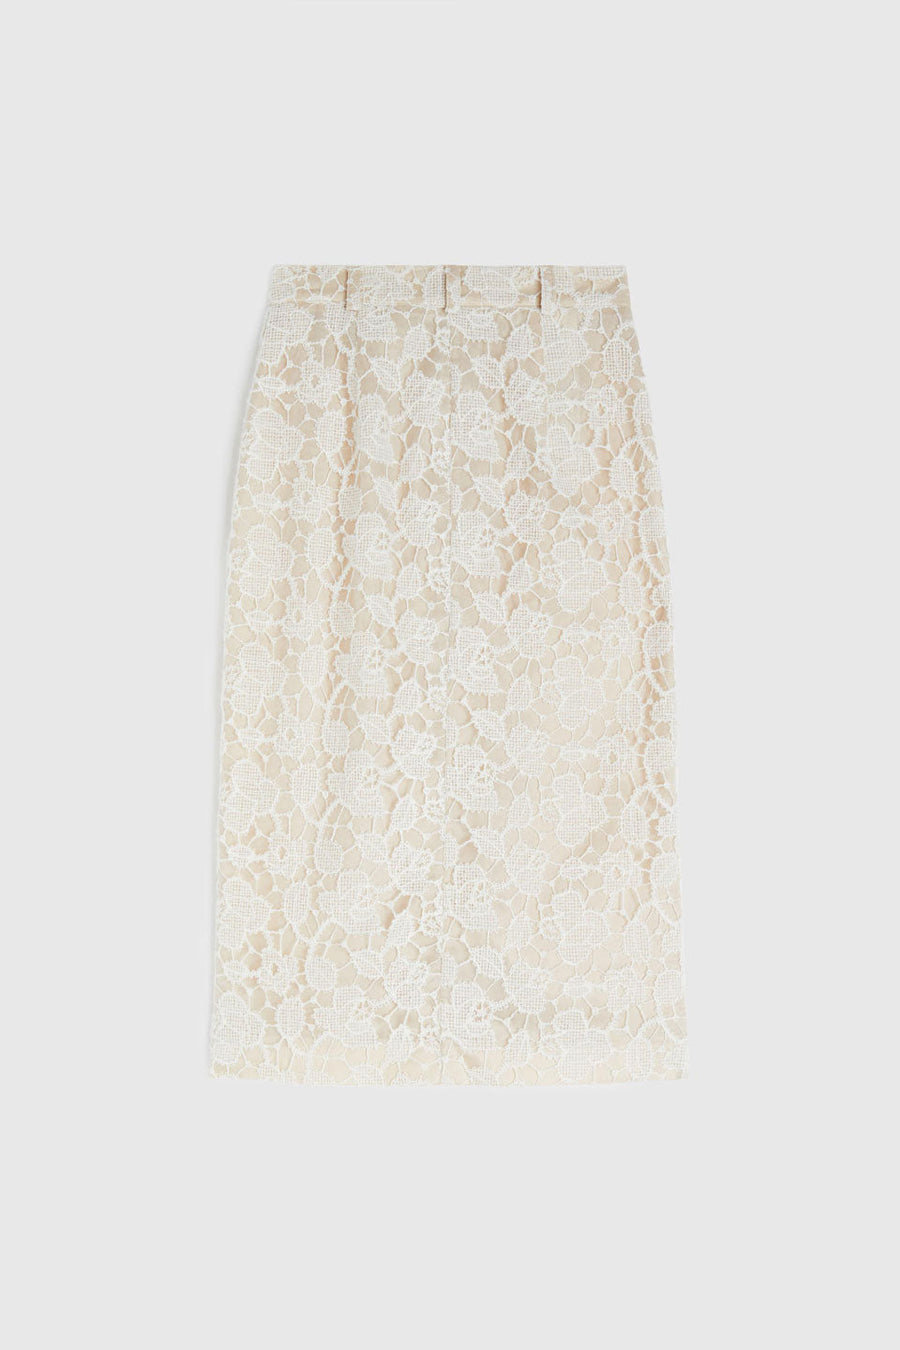 rochas pencil skirt in embroidery back